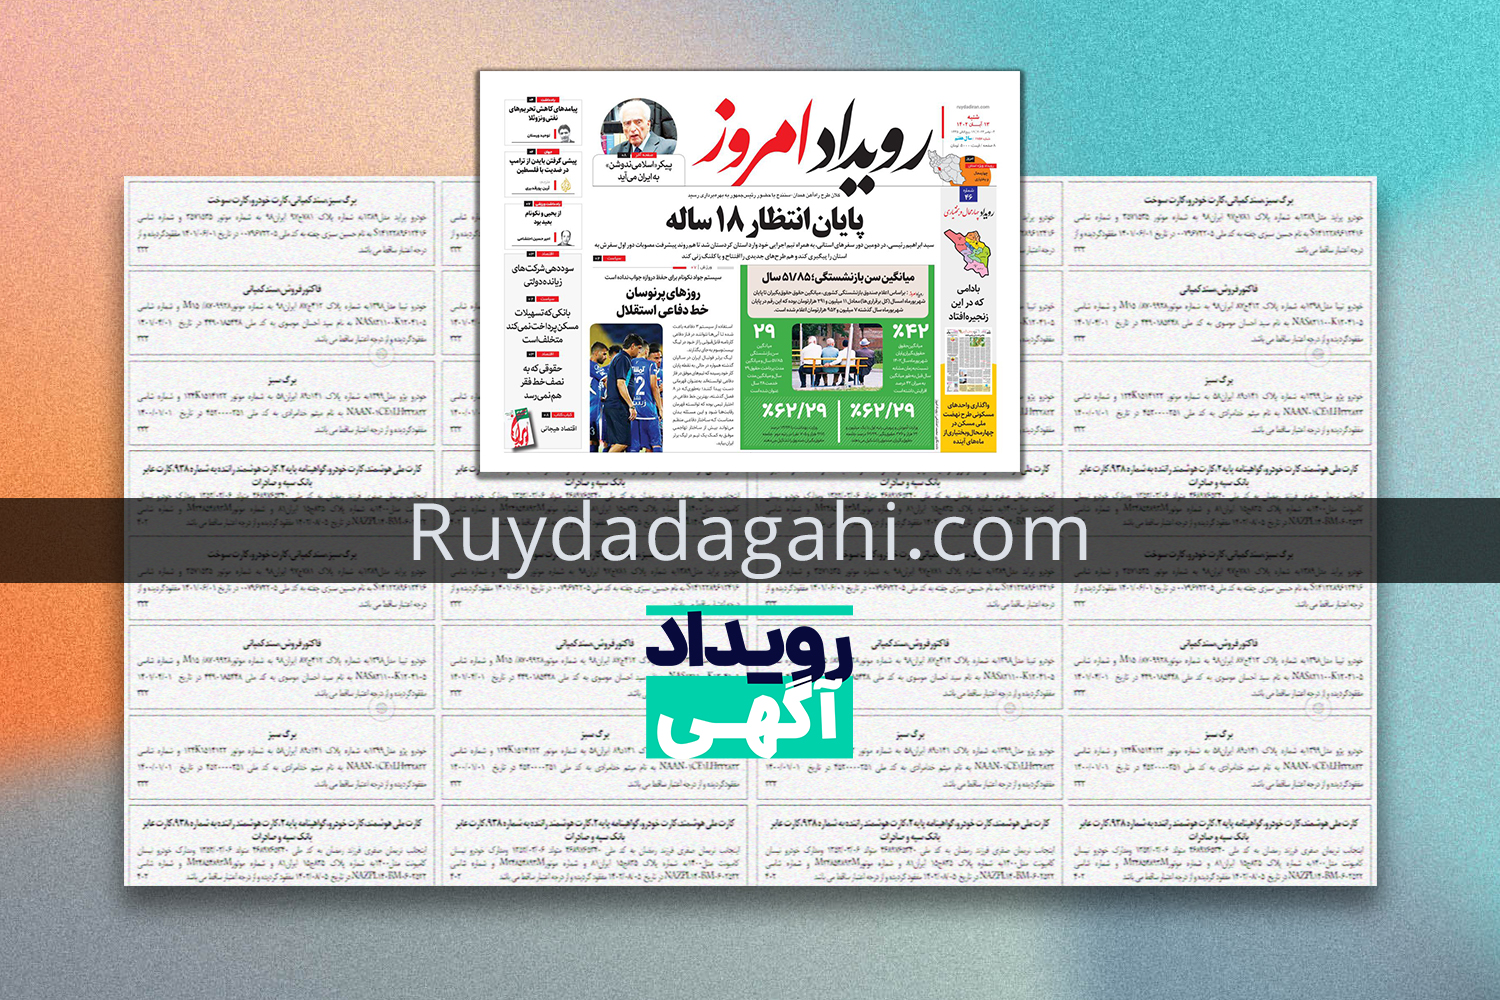 Order to print a missing ad in Isfahan for publication in the newspaper